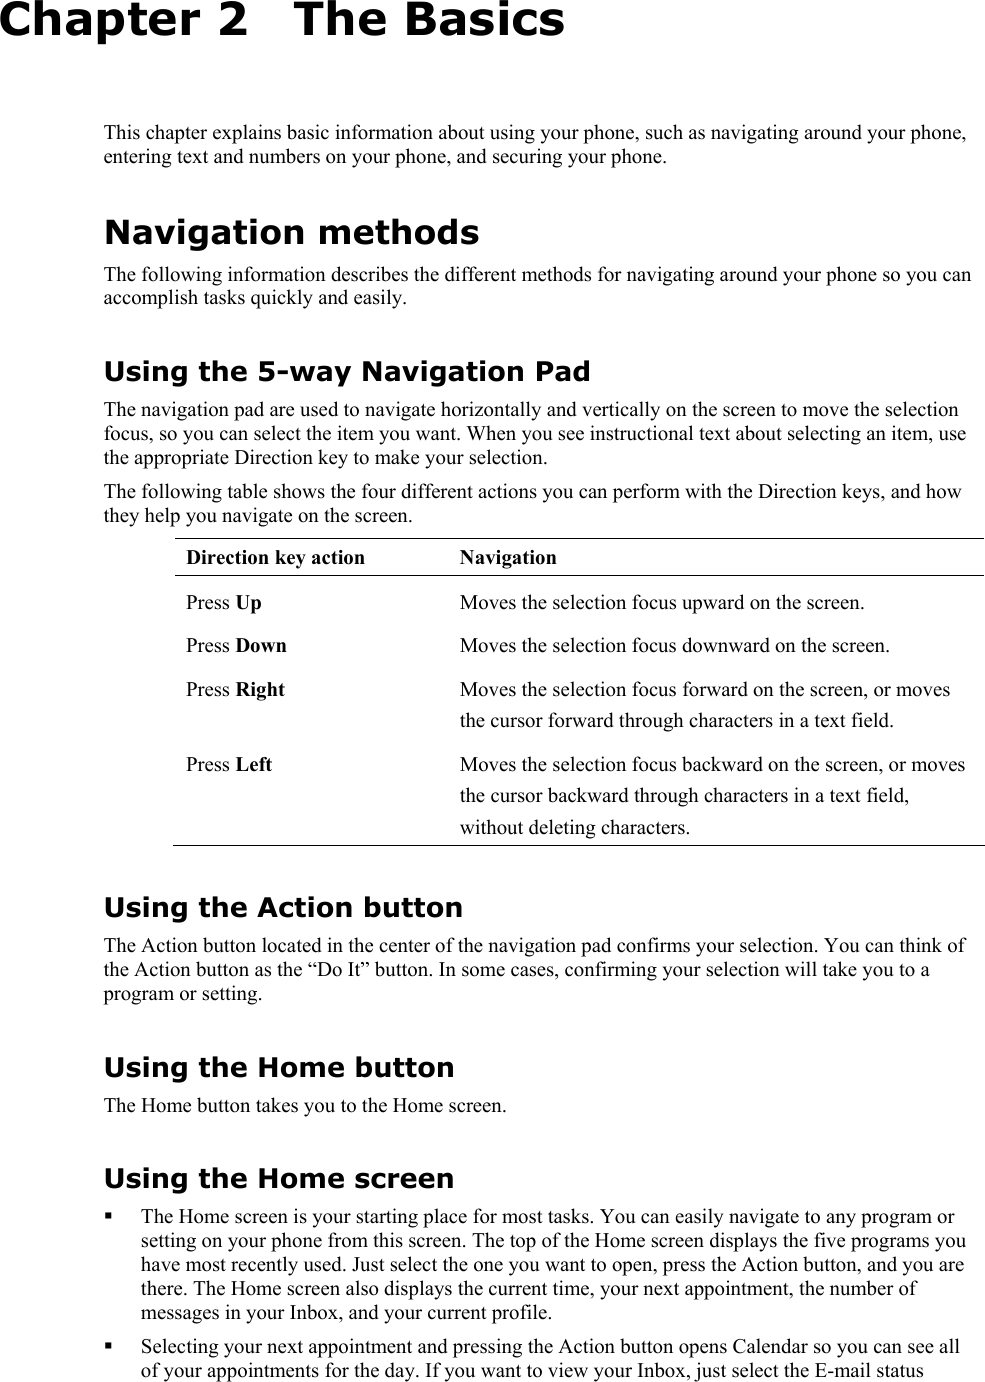   Chapter 2   The Basics This chapter explains basic information about using your phone, such as navigating around your phone, entering text and numbers on your phone, and securing your phone. Navigation methods The following information describes the different methods for navigating around your phone so you can accomplish tasks quickly and easily. Using the 5-way Navigation Pad The navigation pad are used to navigate horizontally and vertically on the screen to move the selection focus, so you can select the item you want. When you see instructional text about selecting an item, use the appropriate Direction key to make your selection. The following table shows the four different actions you can perform with the Direction keys, and how they help you navigate on the screen. Direction key action  Navigation Press Up  Moves the selection focus upward on the screen. Press Down  Moves the selection focus downward on the screen. Press Right  Moves the selection focus forward on the screen, or moves the cursor forward through characters in a text field. Press Left  Moves the selection focus backward on the screen, or moves the cursor backward through characters in a text field, without deleting characters. Using the Action button The Action button located in the center of the navigation pad confirms your selection. You can think of the Action button as the “Do It” button. In some cases, confirming your selection will take you to a program or setting. Using the Home button The Home button takes you to the Home screen. Using the Home screen  The Home screen is your starting place for most tasks. You can easily navigate to any program or setting on your phone from this screen. The top of the Home screen displays the five programs you have most recently used. Just select the one you want to open, press the Action button, and you are there. The Home screen also displays the current time, your next appointment, the number of messages in your Inbox, and your current profile.  Selecting your next appointment and pressing the Action button opens Calendar so you can see all of your appointments for the day. If you want to view your Inbox, just select the E-mail status 